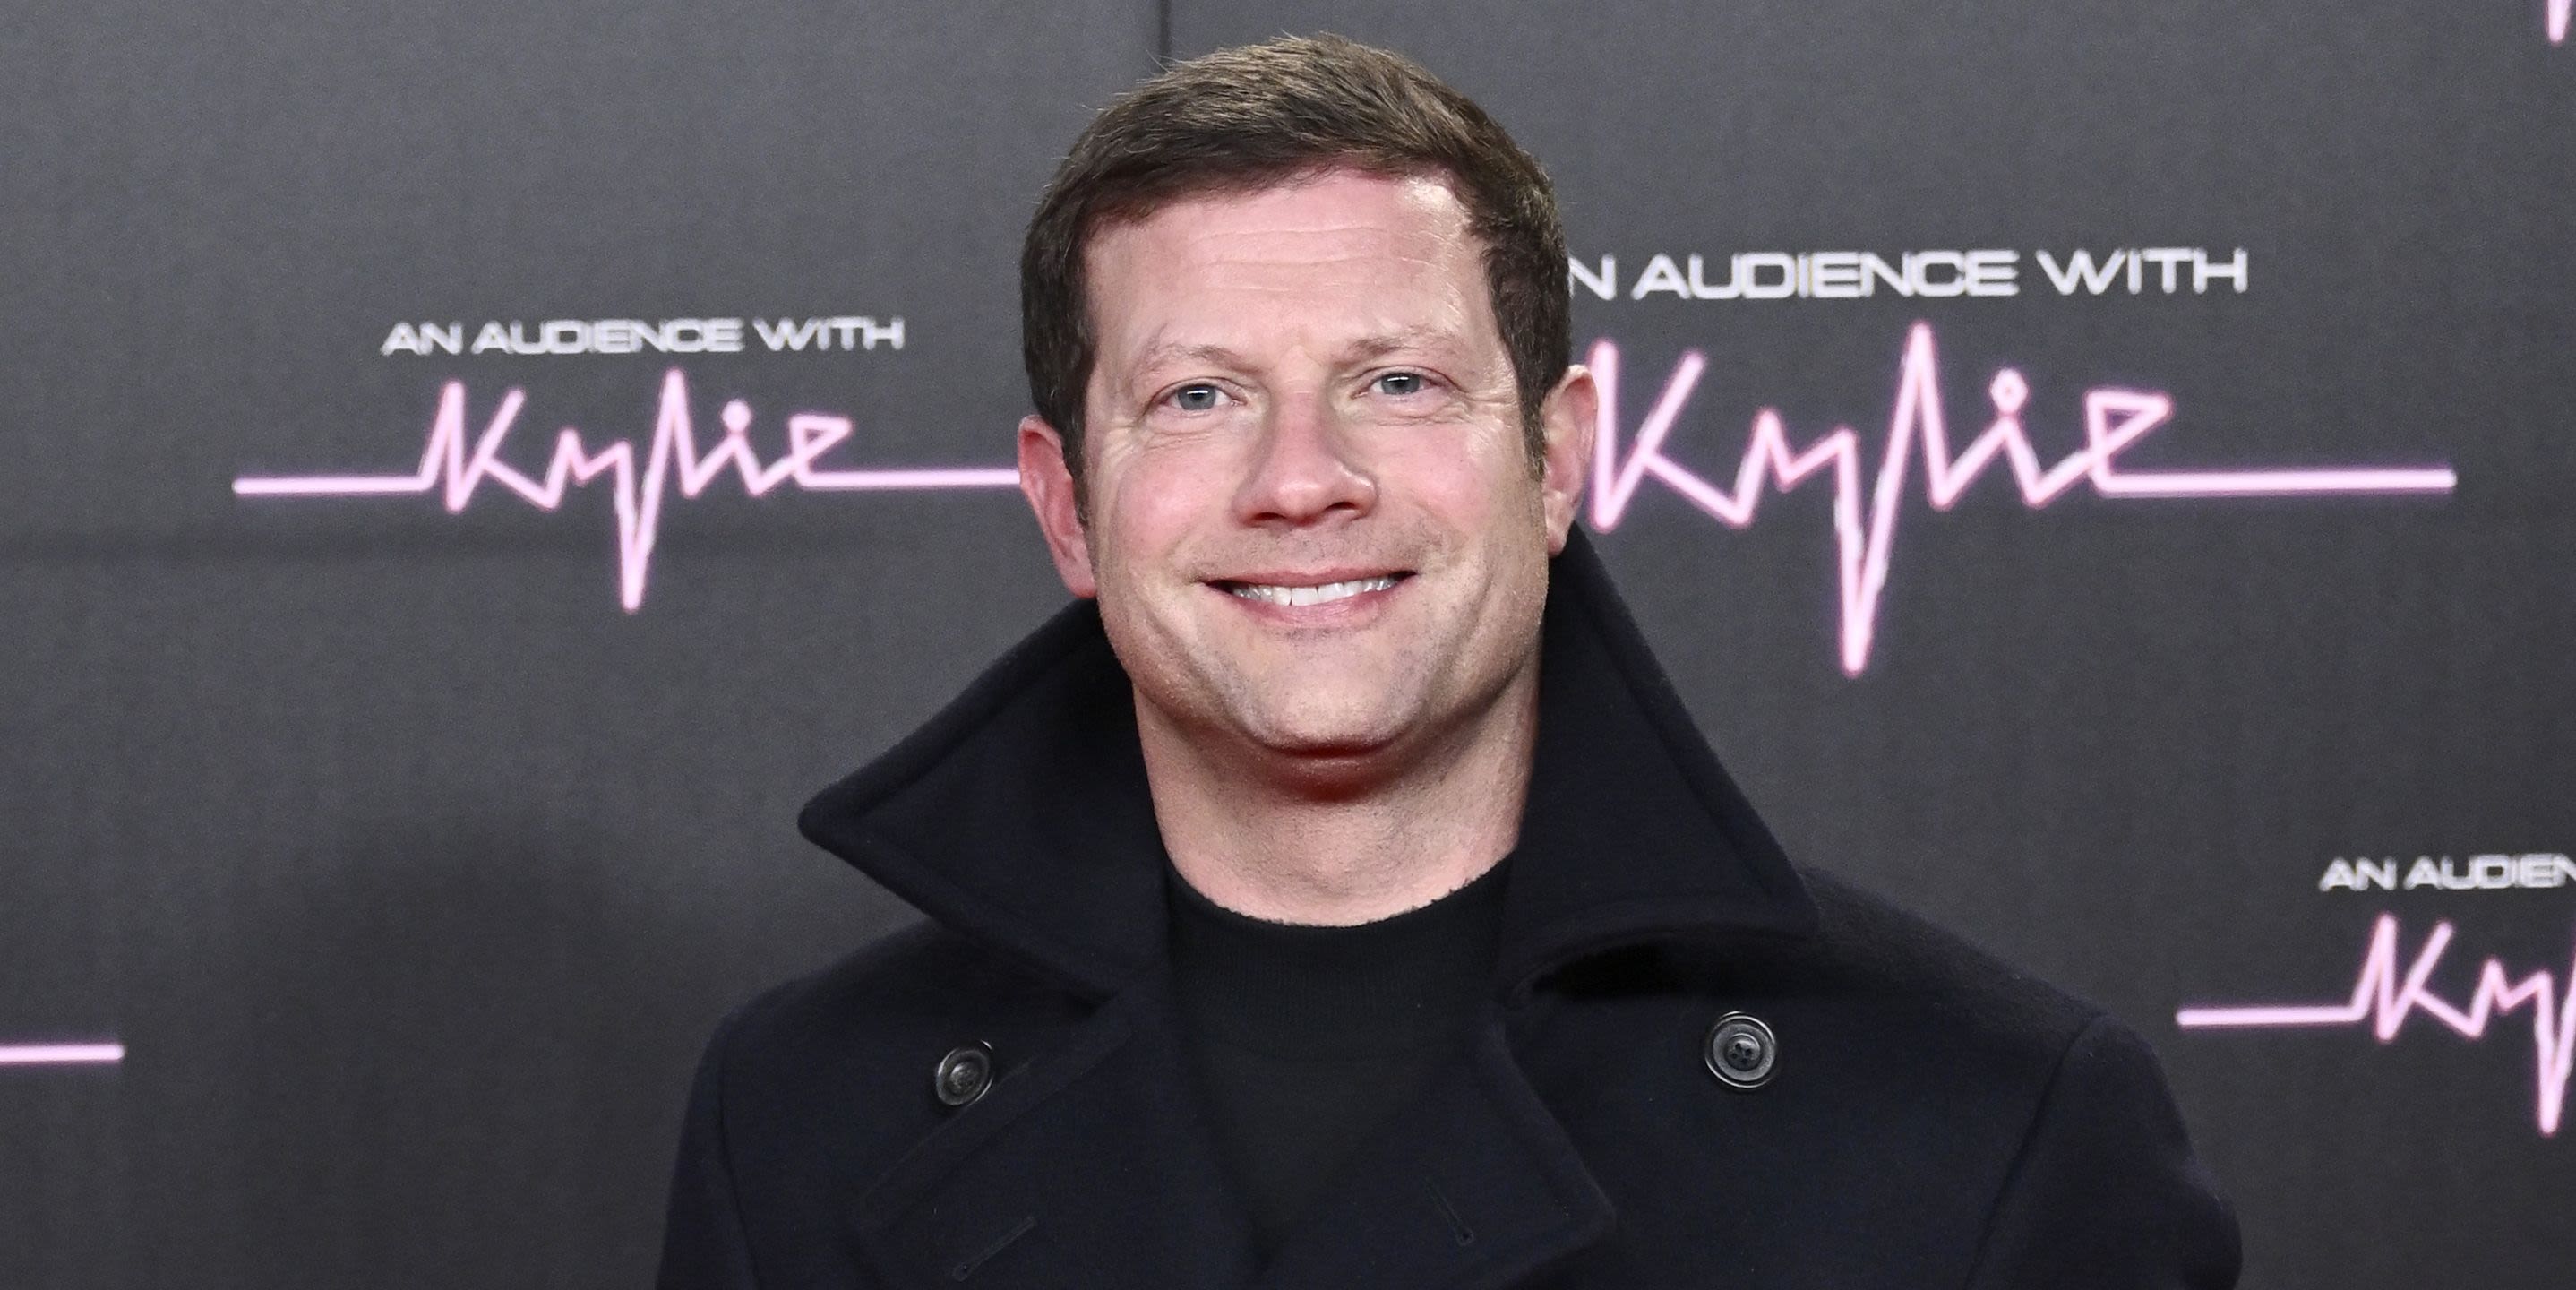 This Morning's Dermot O'Leary lands exciting new show